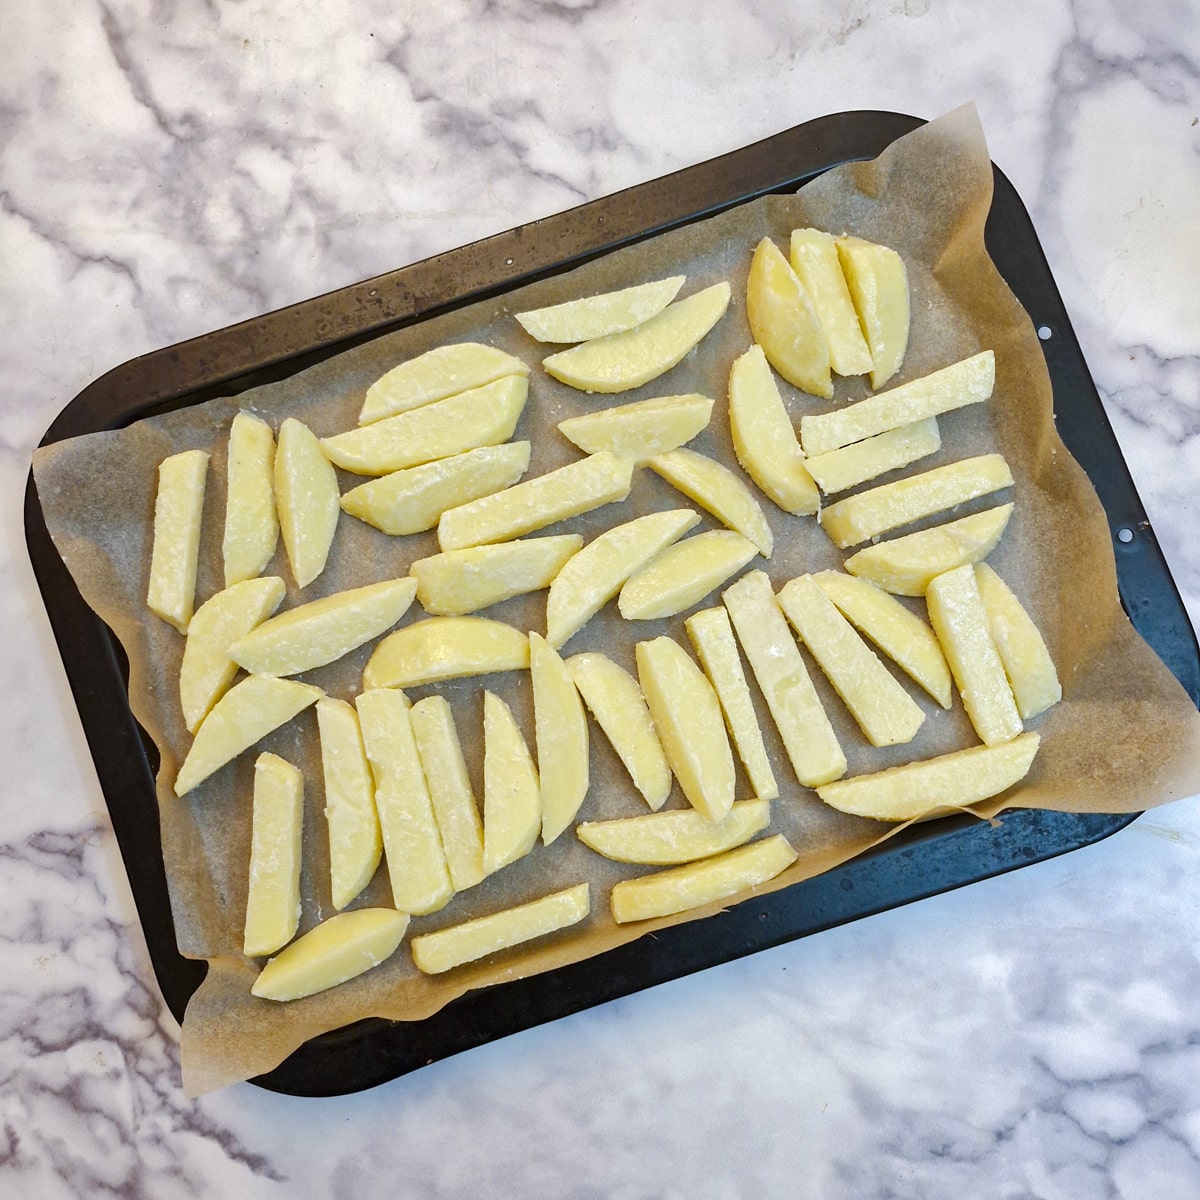 A baking tray lined with baking parchment with a single layer of chips arranged on it.